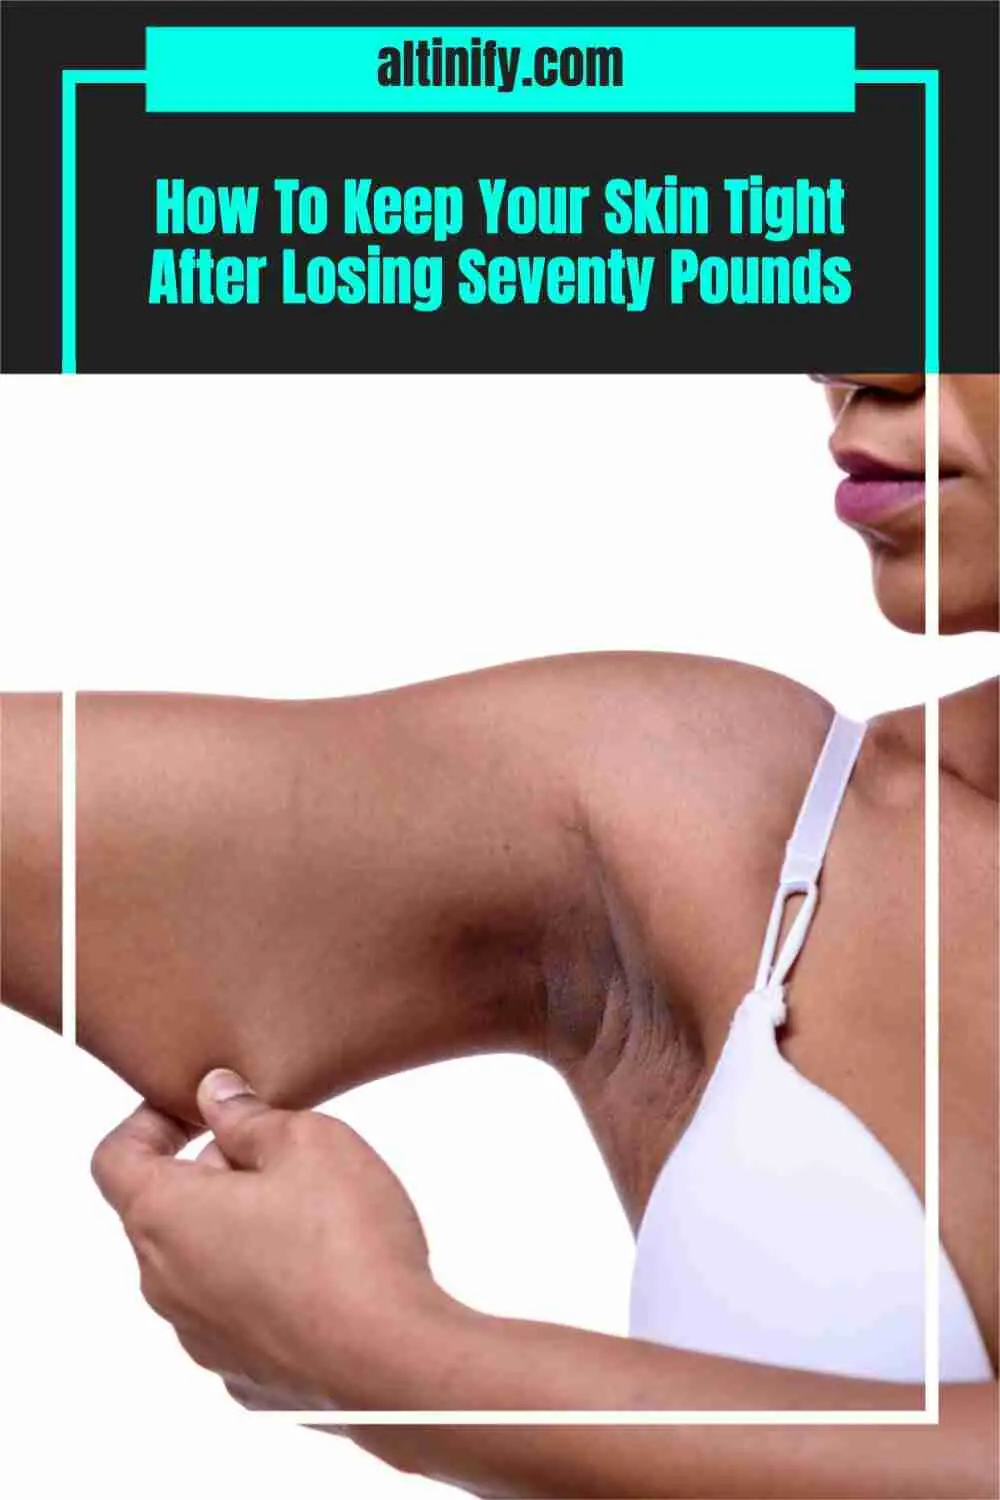 How To Keep Your Skin Tight After Losing Seventy Pounds